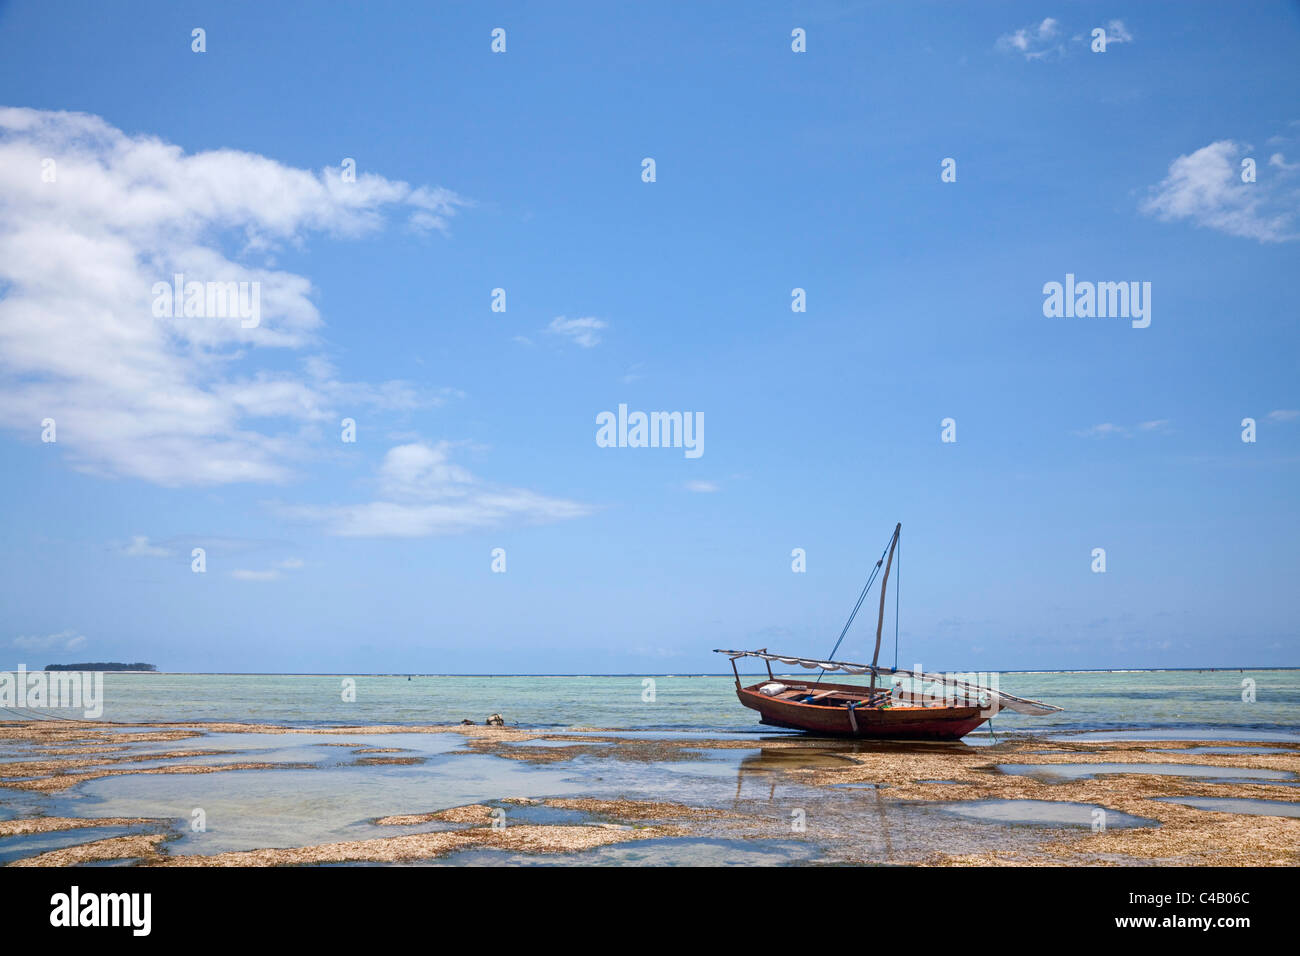 Zanzibar, Matemwe. A boat is stranded on the low tide, with Mnemba Island in the distance. Stock Photo